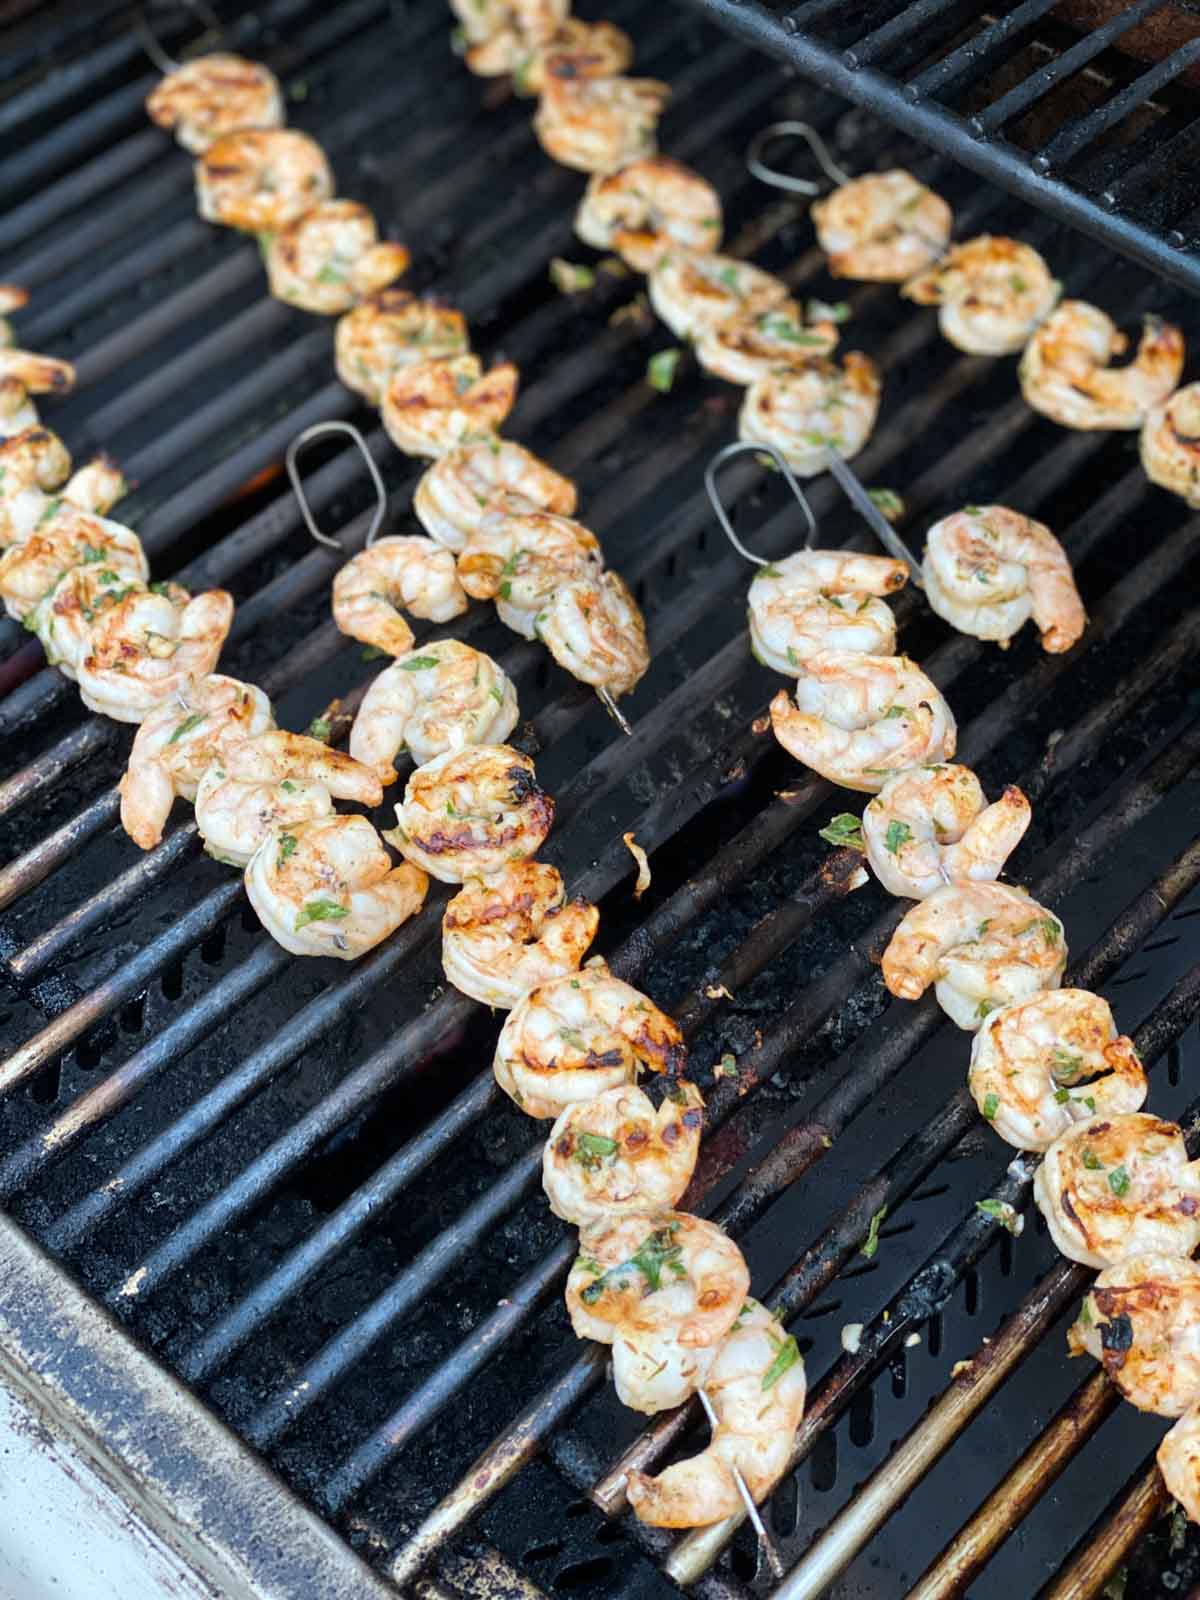 Shrimp on skewers on gas grill grates being flipped to cooked on the other side